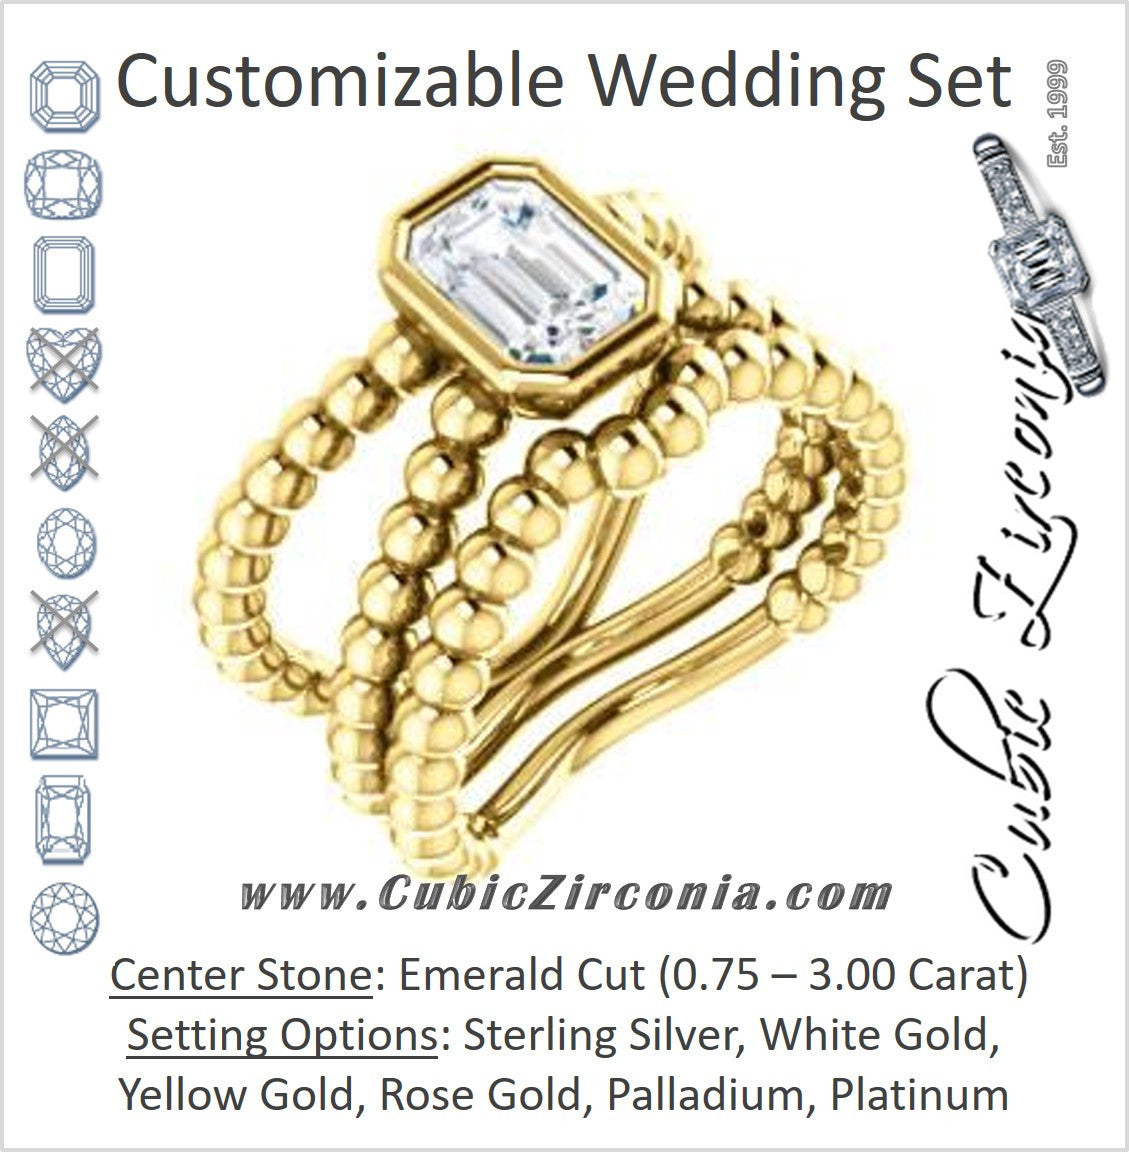 CZ Wedding Set, featuring The Maria Leeslii engagement ring (Customizable Bezel-set Emerald Cut Solitaire with Wide Beaded-Metal Split-Band)